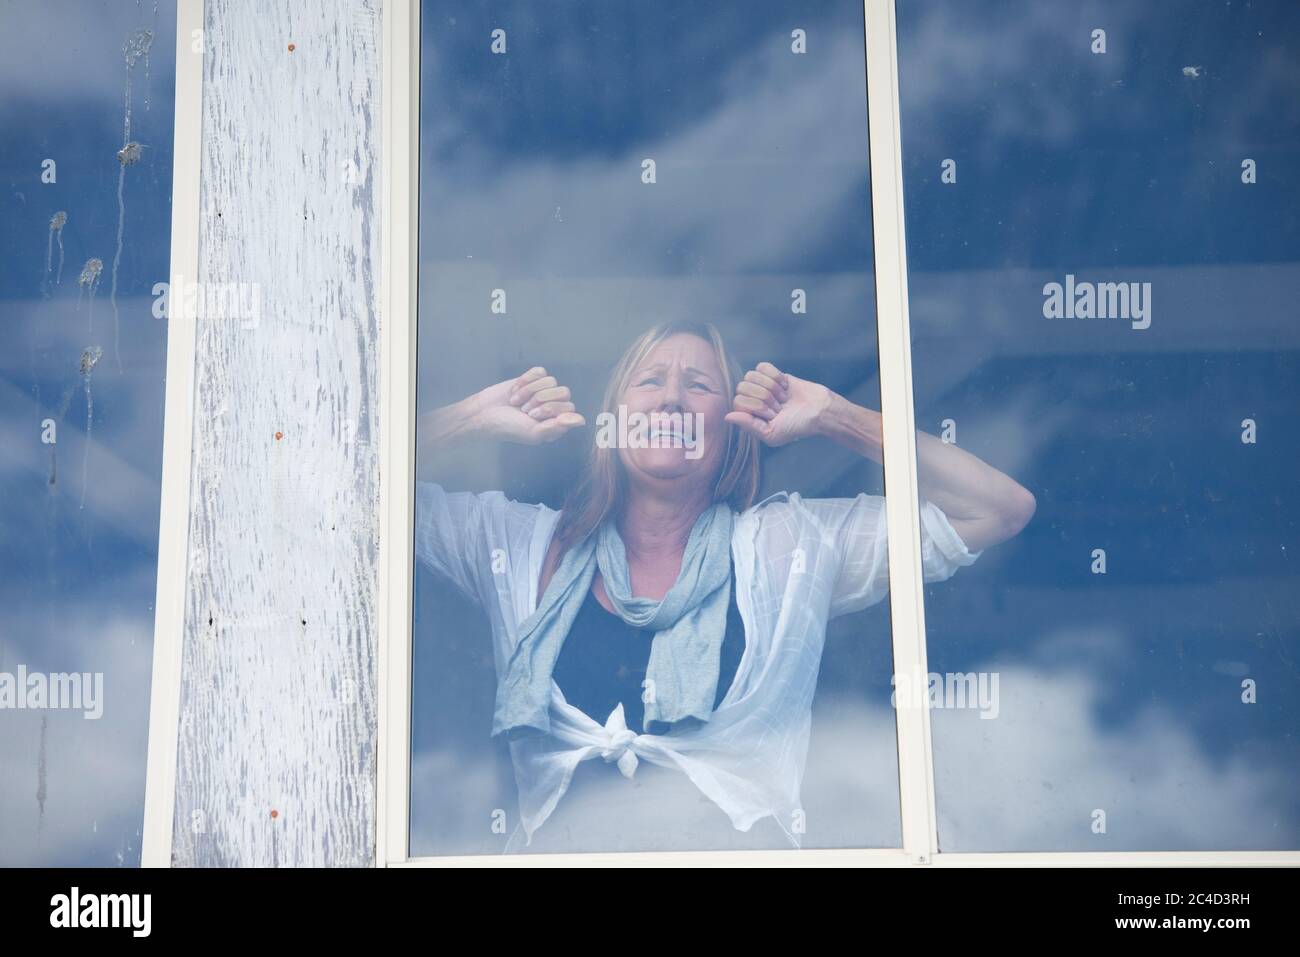 Stressed mature woman crying in despair behind window inside house or home, depressed, sad, lonely, unhappy expression, copy space. Stock Photo